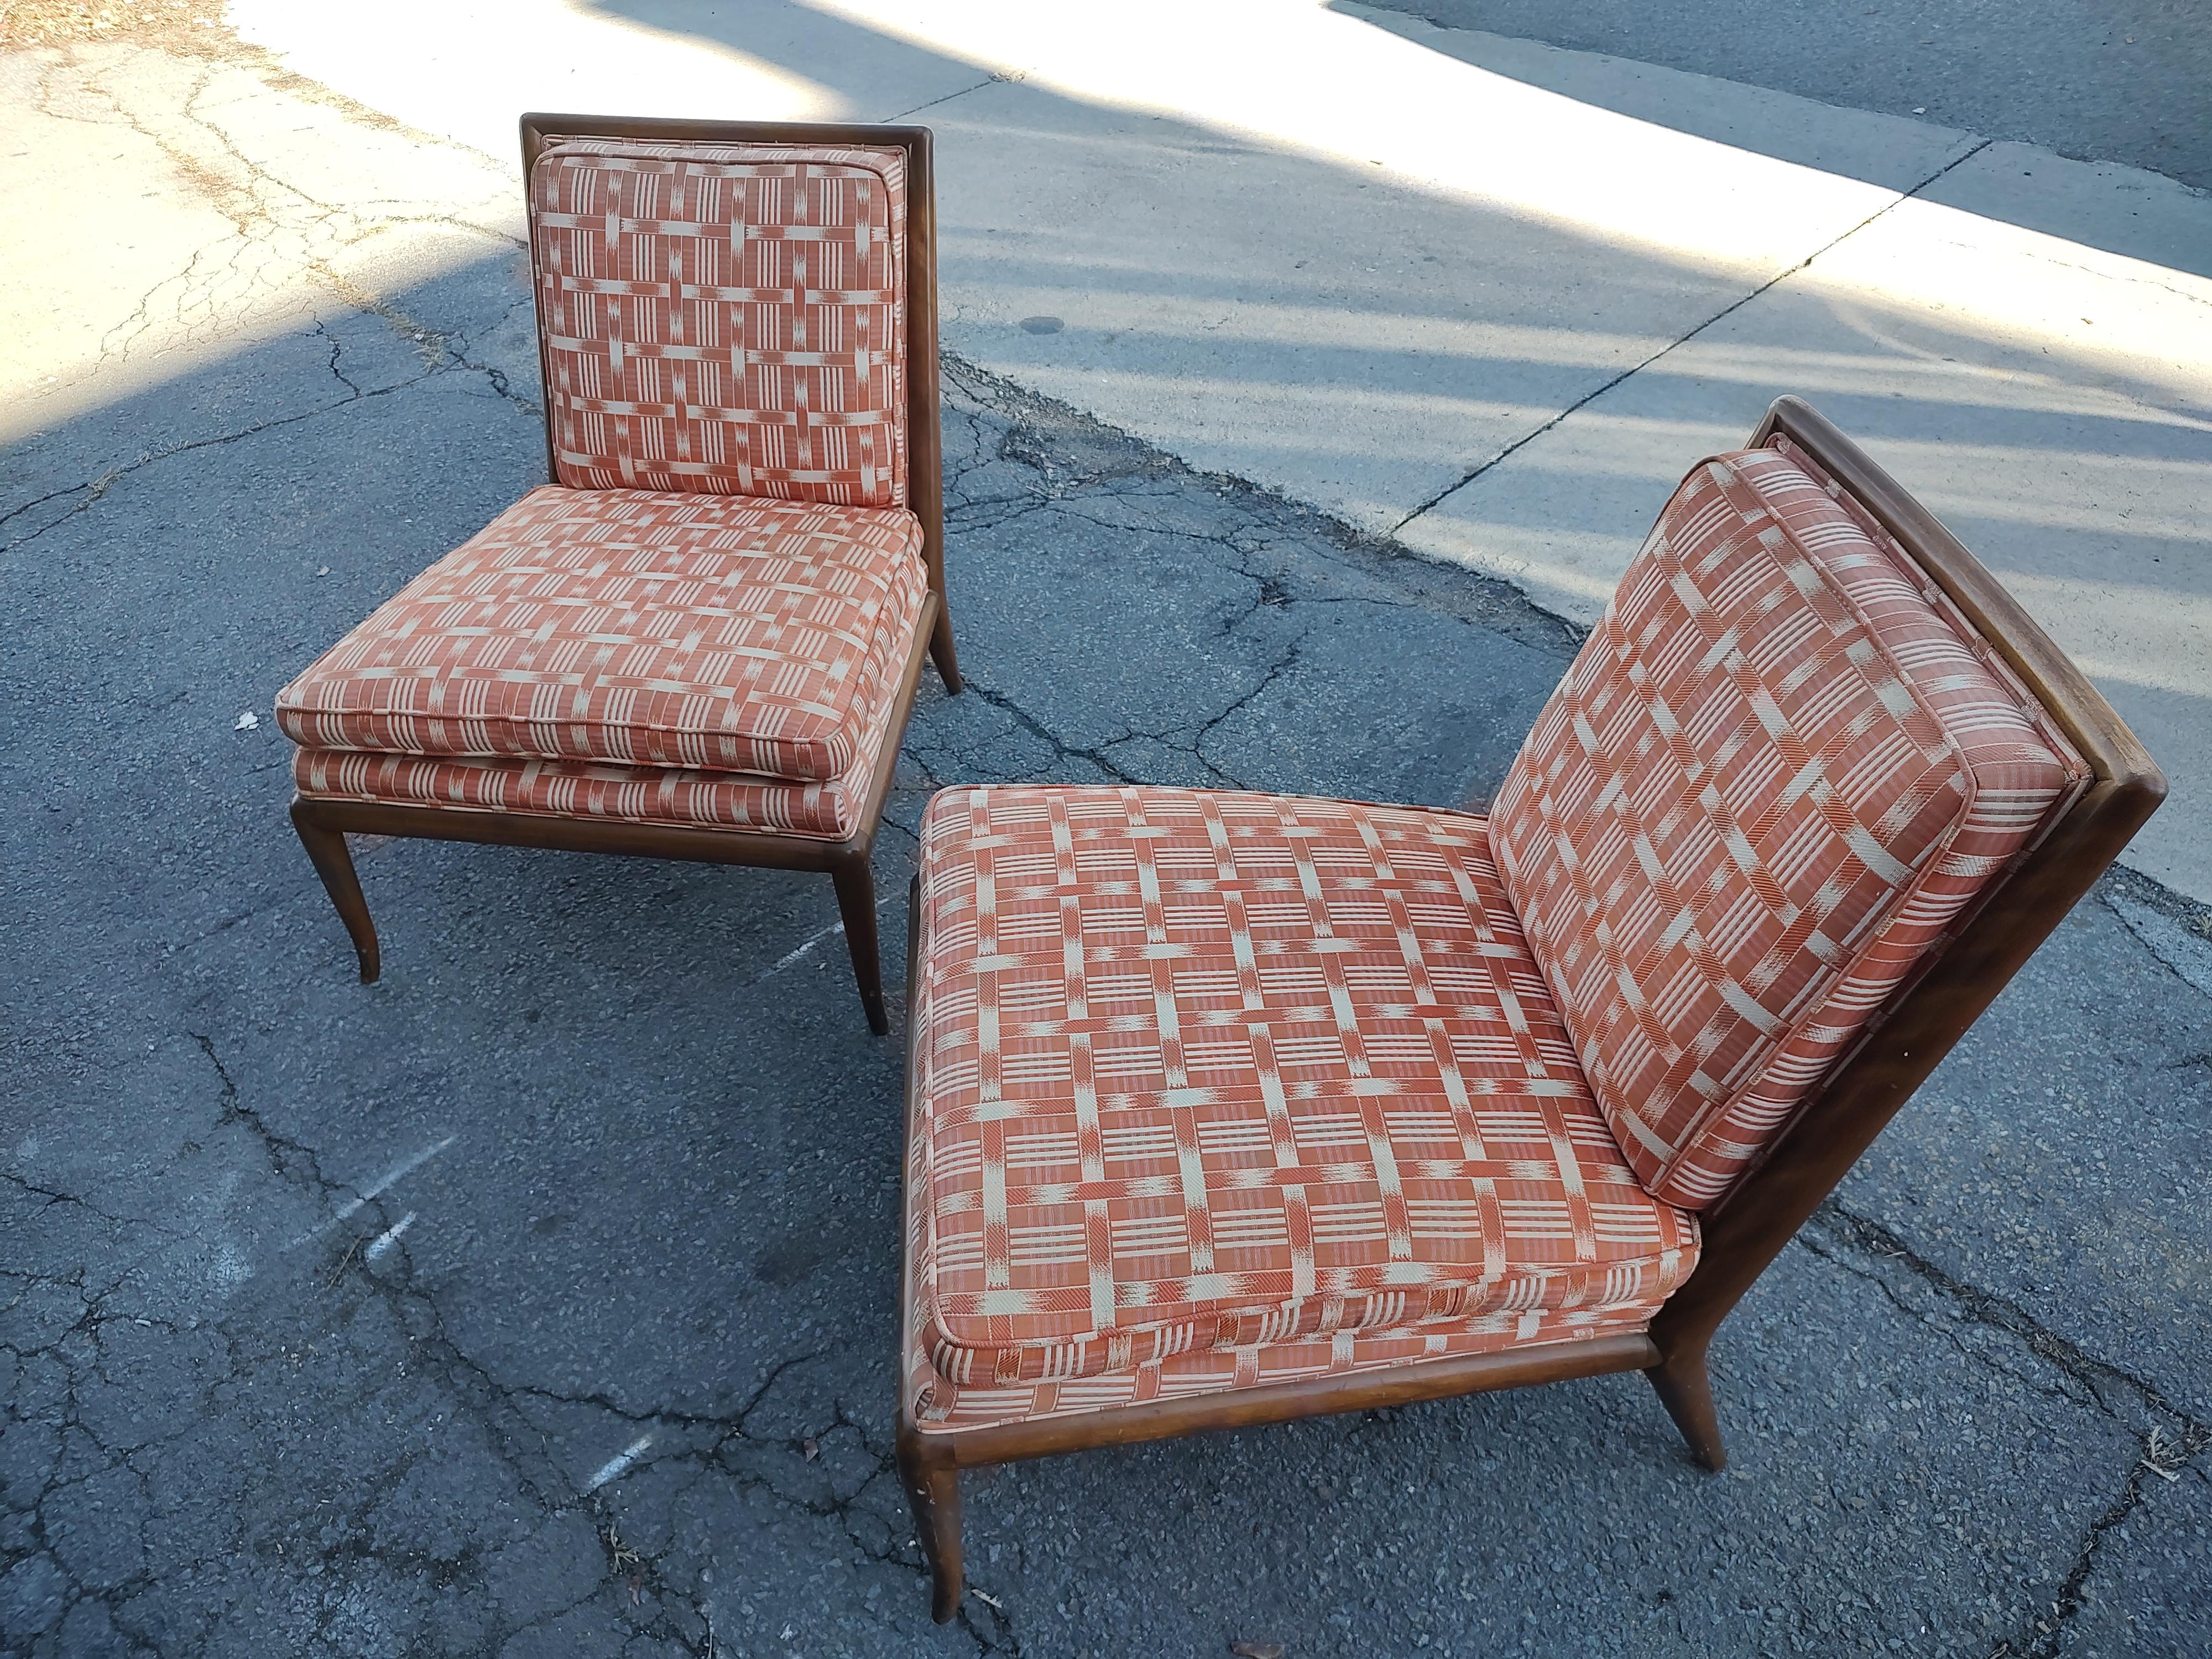 Fabulous roomy pair of Sculptural walnut lounge chairs by Robs Johns Gibbons from the early 60s. The frames are in excellent vintage condition with minimal wear, some scuffs but no damage and are tight. The fabric is faded and the seat foam has